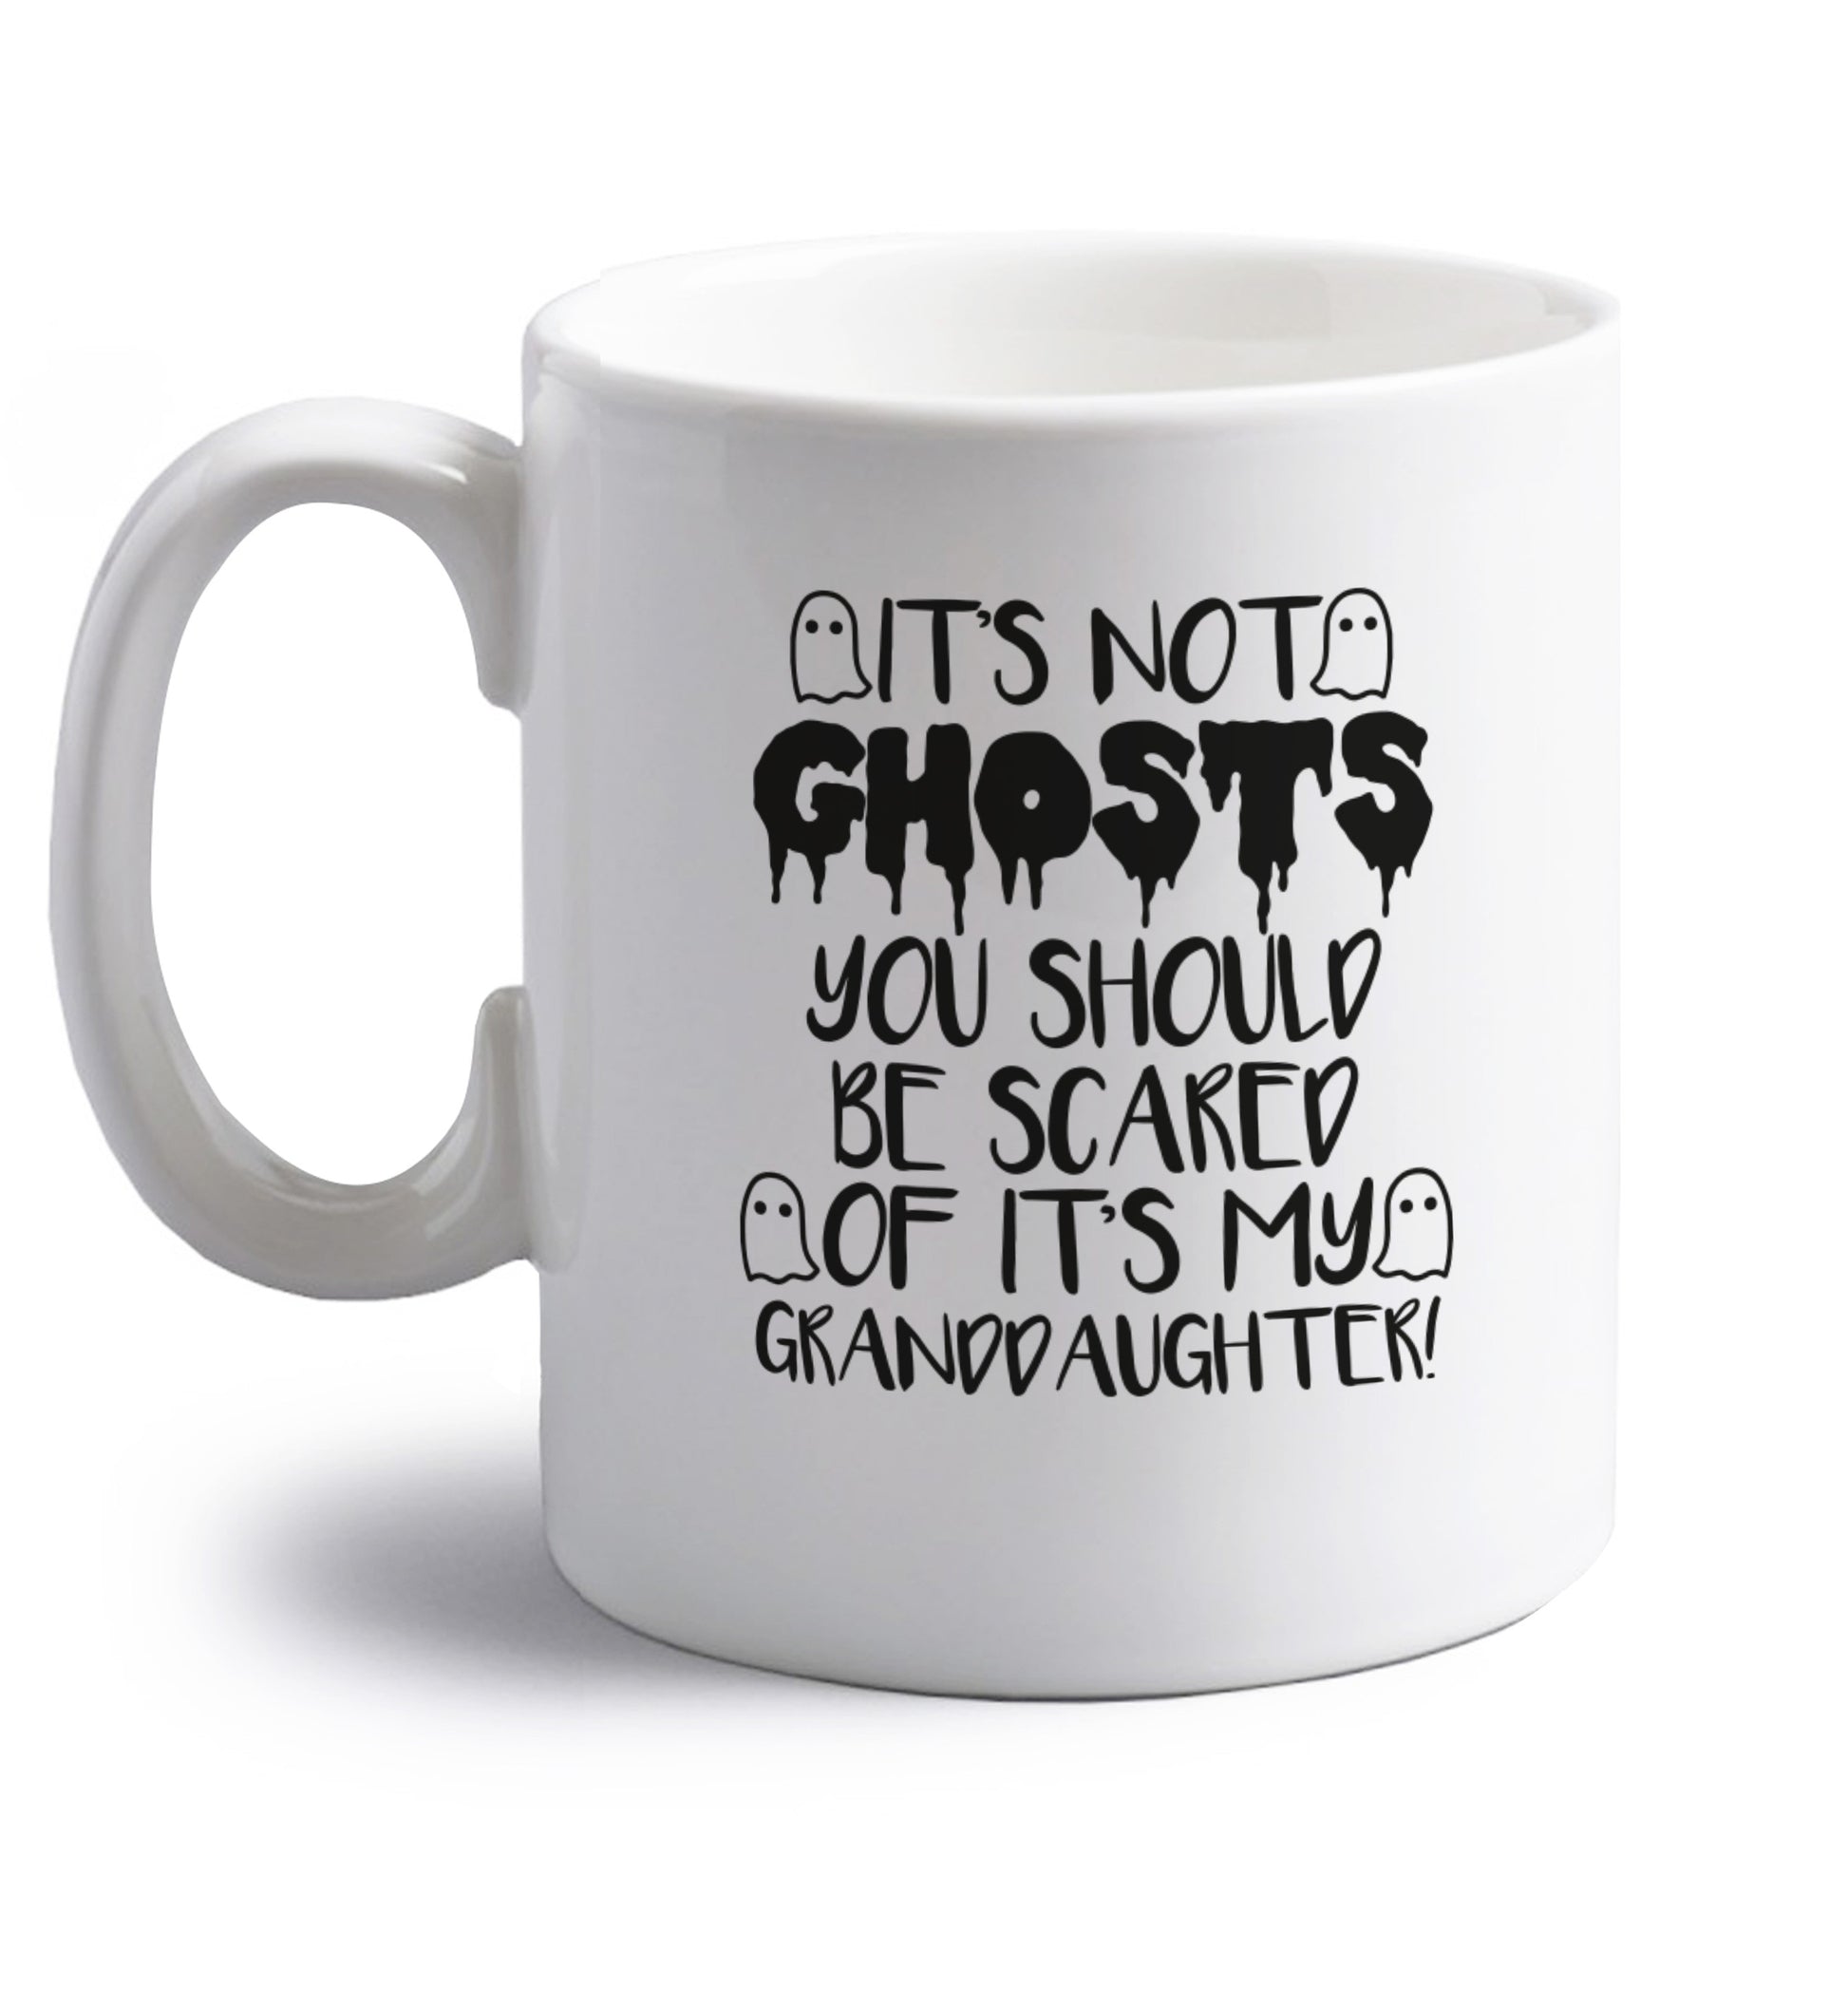 It's not ghosts you should be scared of it's my granddaughter! right handed white ceramic mug 